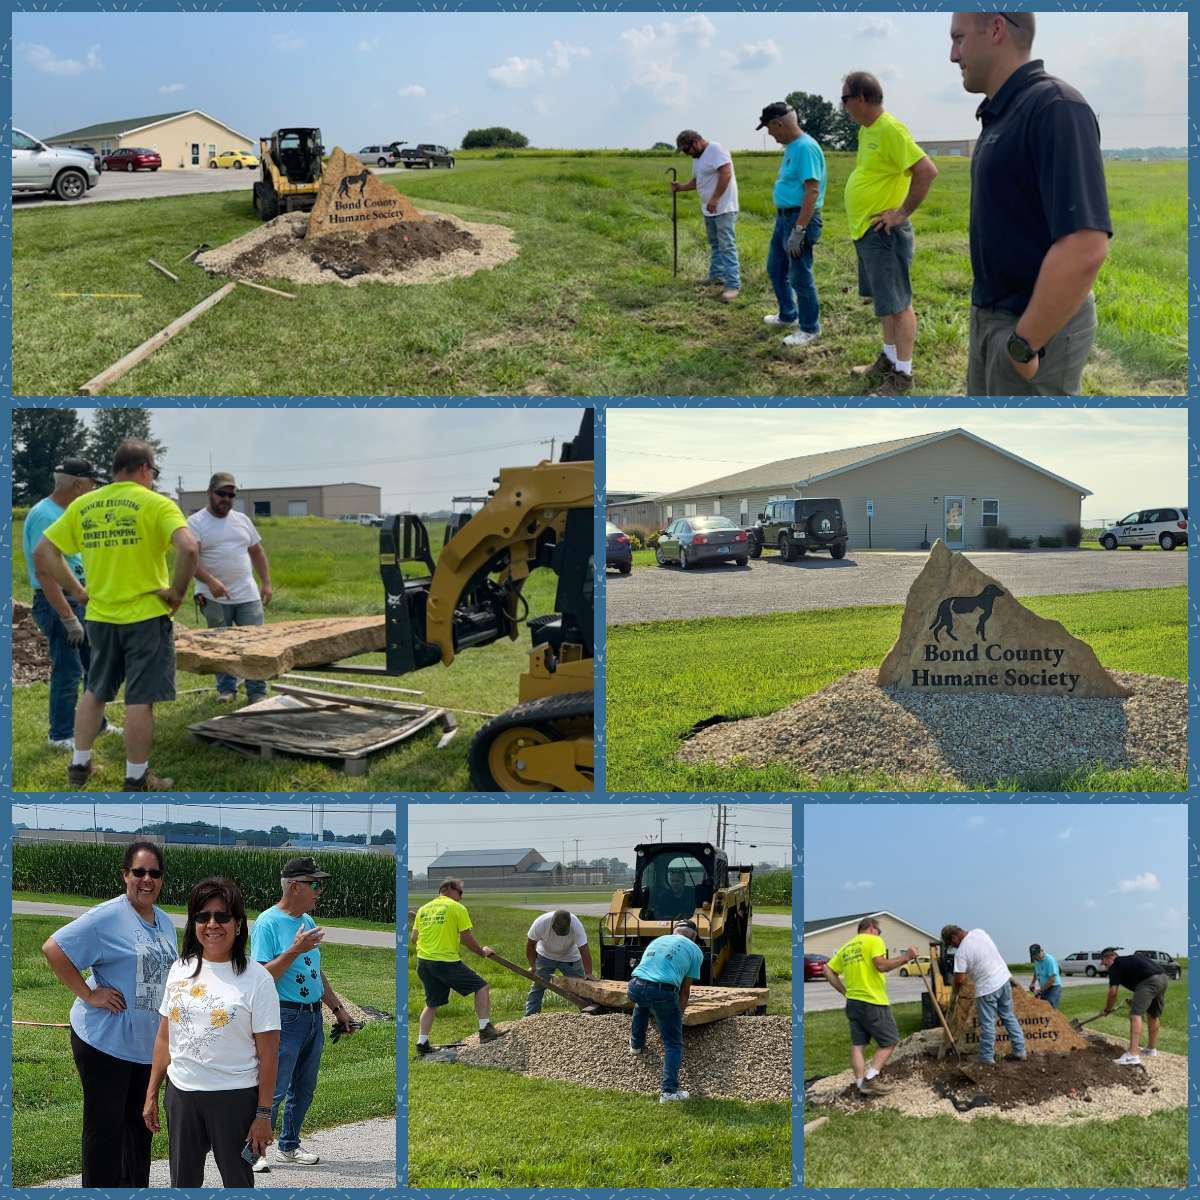 collage of 6 photos storyboarding the installation of a rock sign in the lawn by several men, women, and Skid-Steer Loader